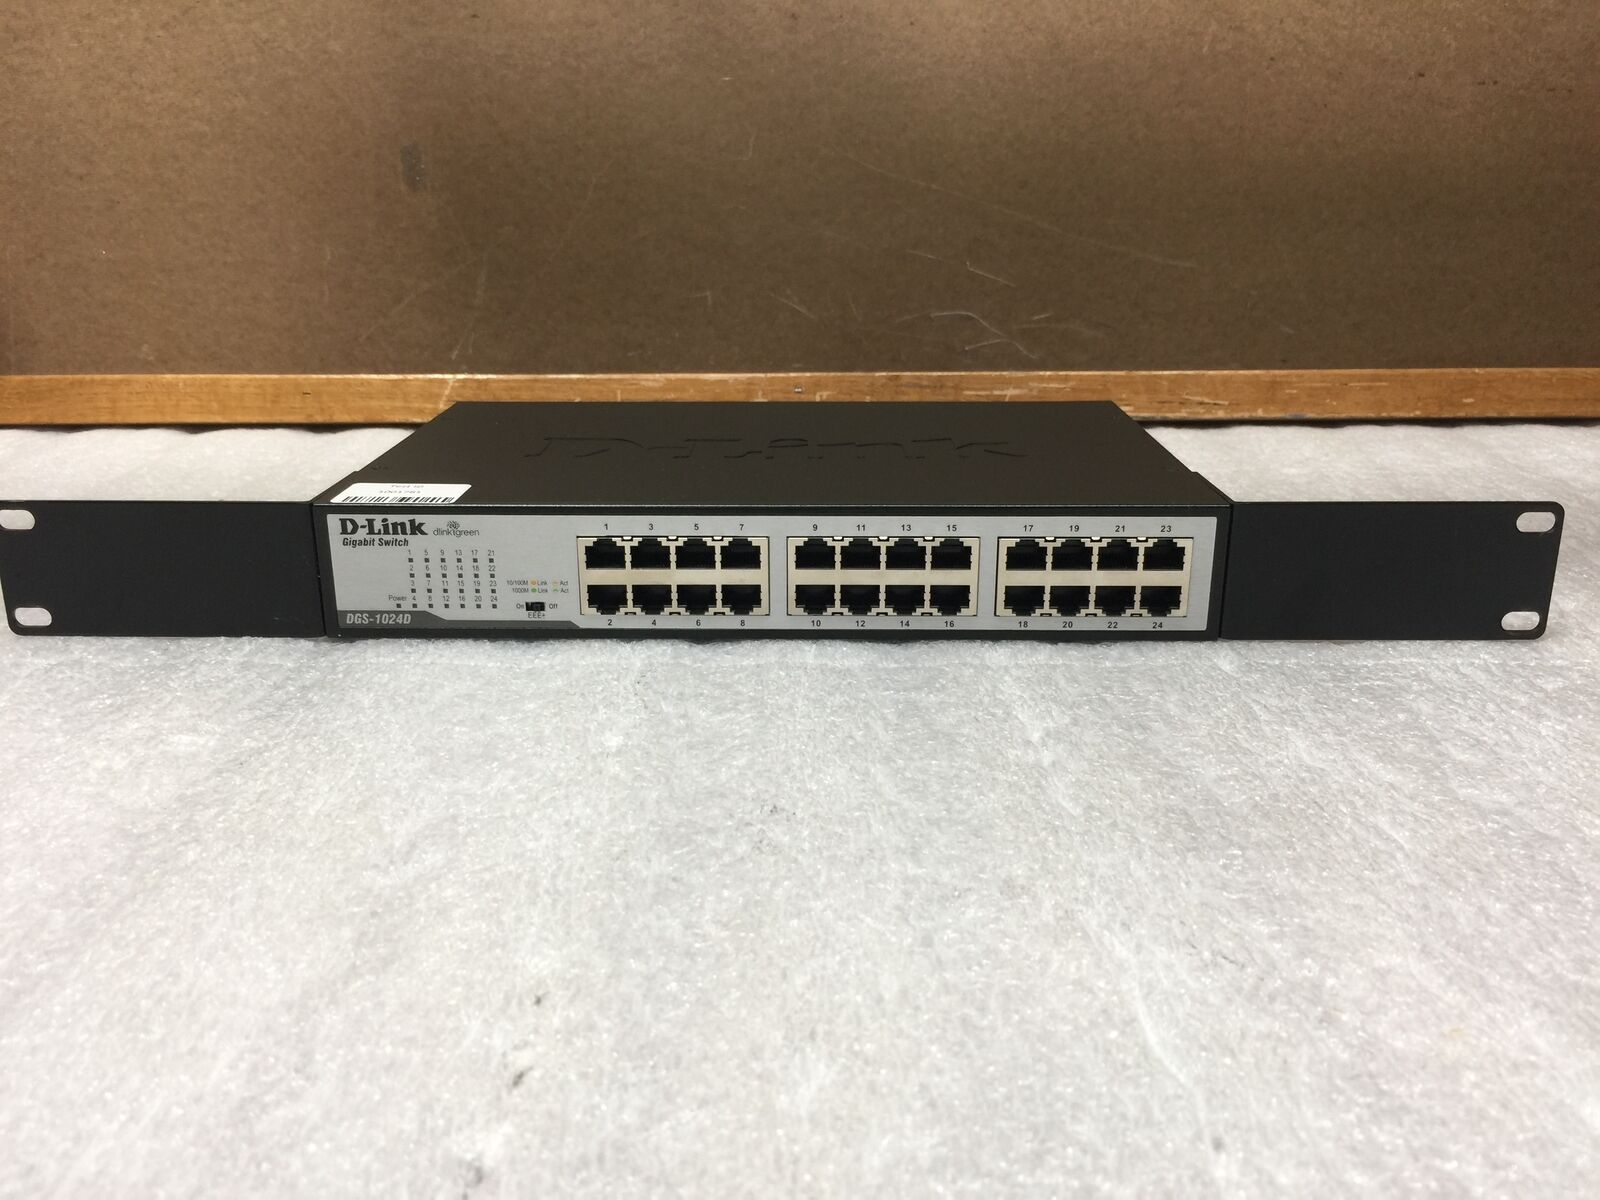 D-Link DGS DGS-1024D 24-Ports Gigabit Switch - Tested and Working, w/Rack Ears